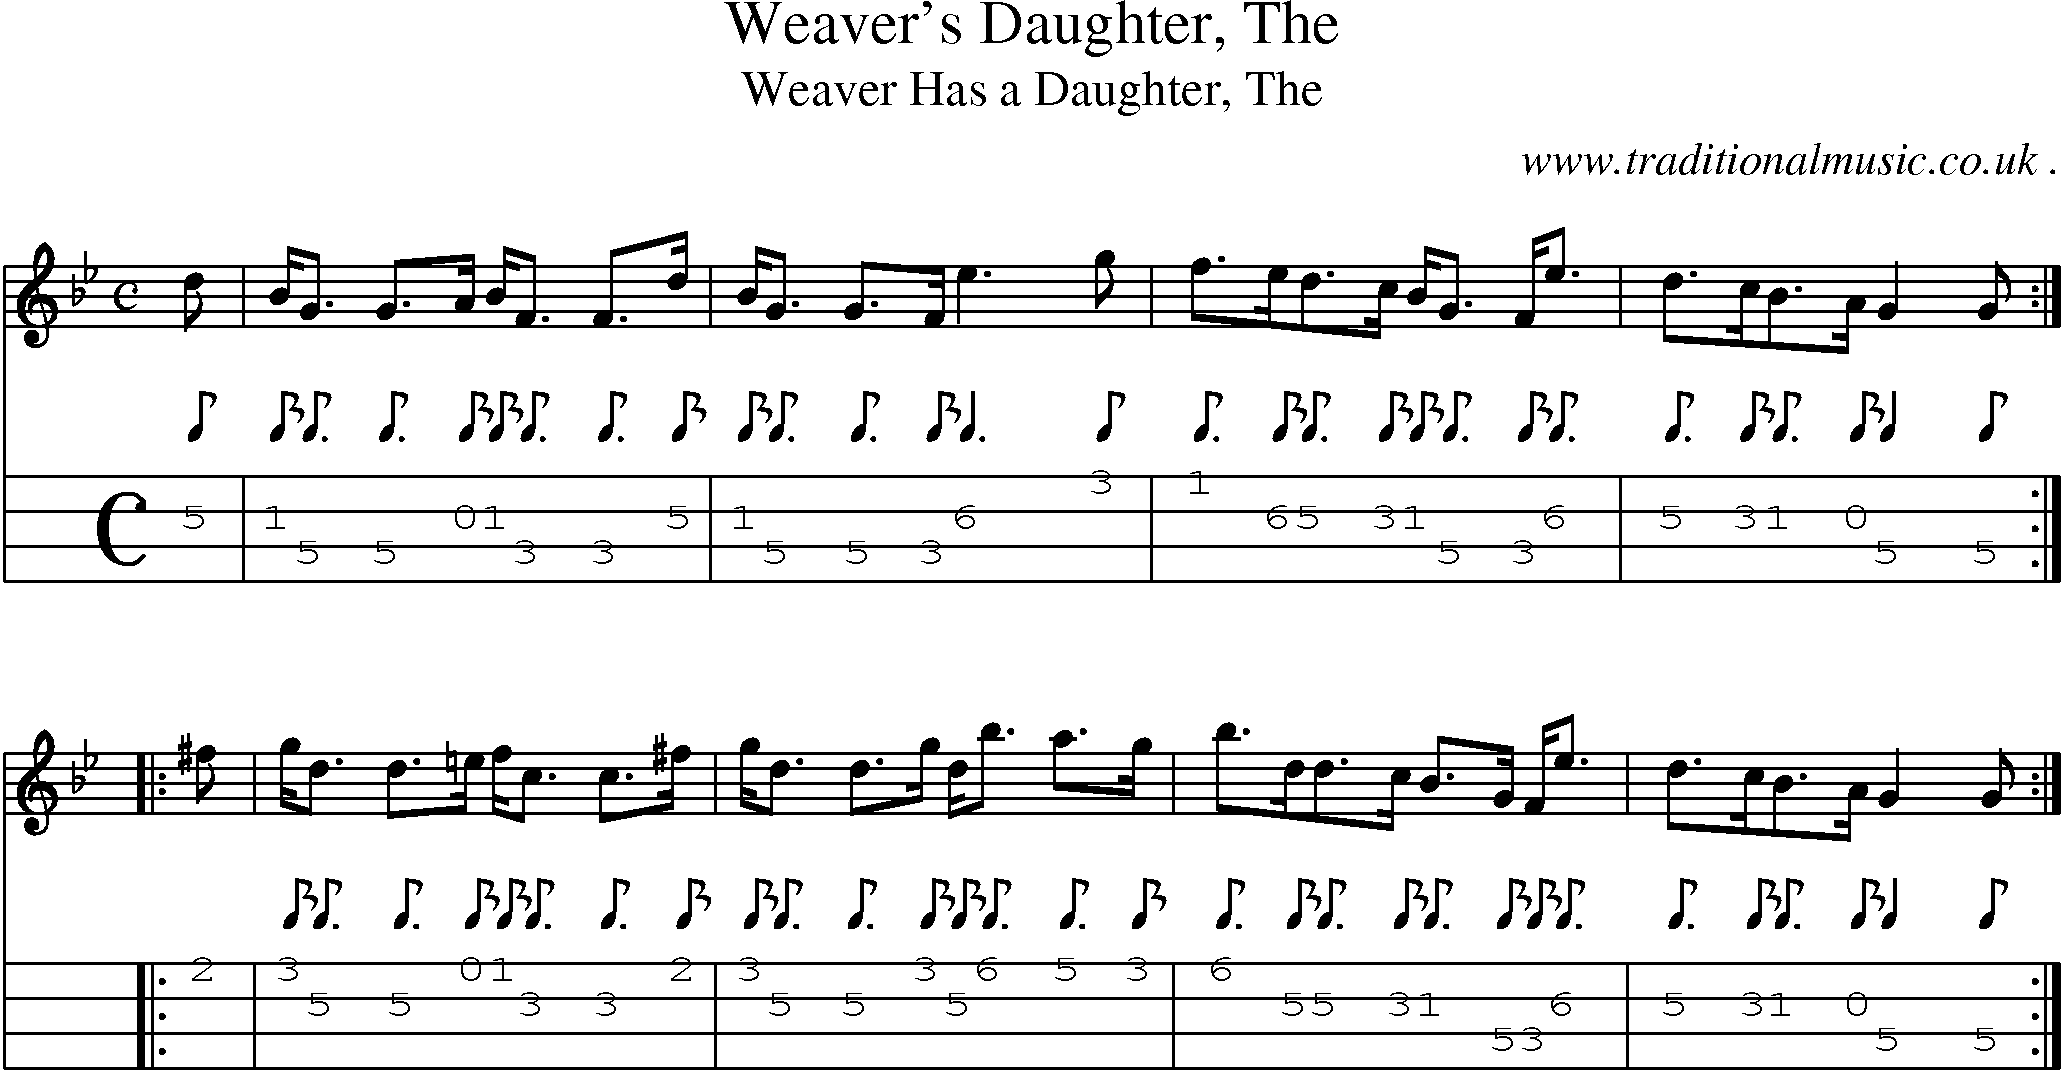 Sheet-music  score, Chords and Mandolin Tabs for Weavers Daughter The